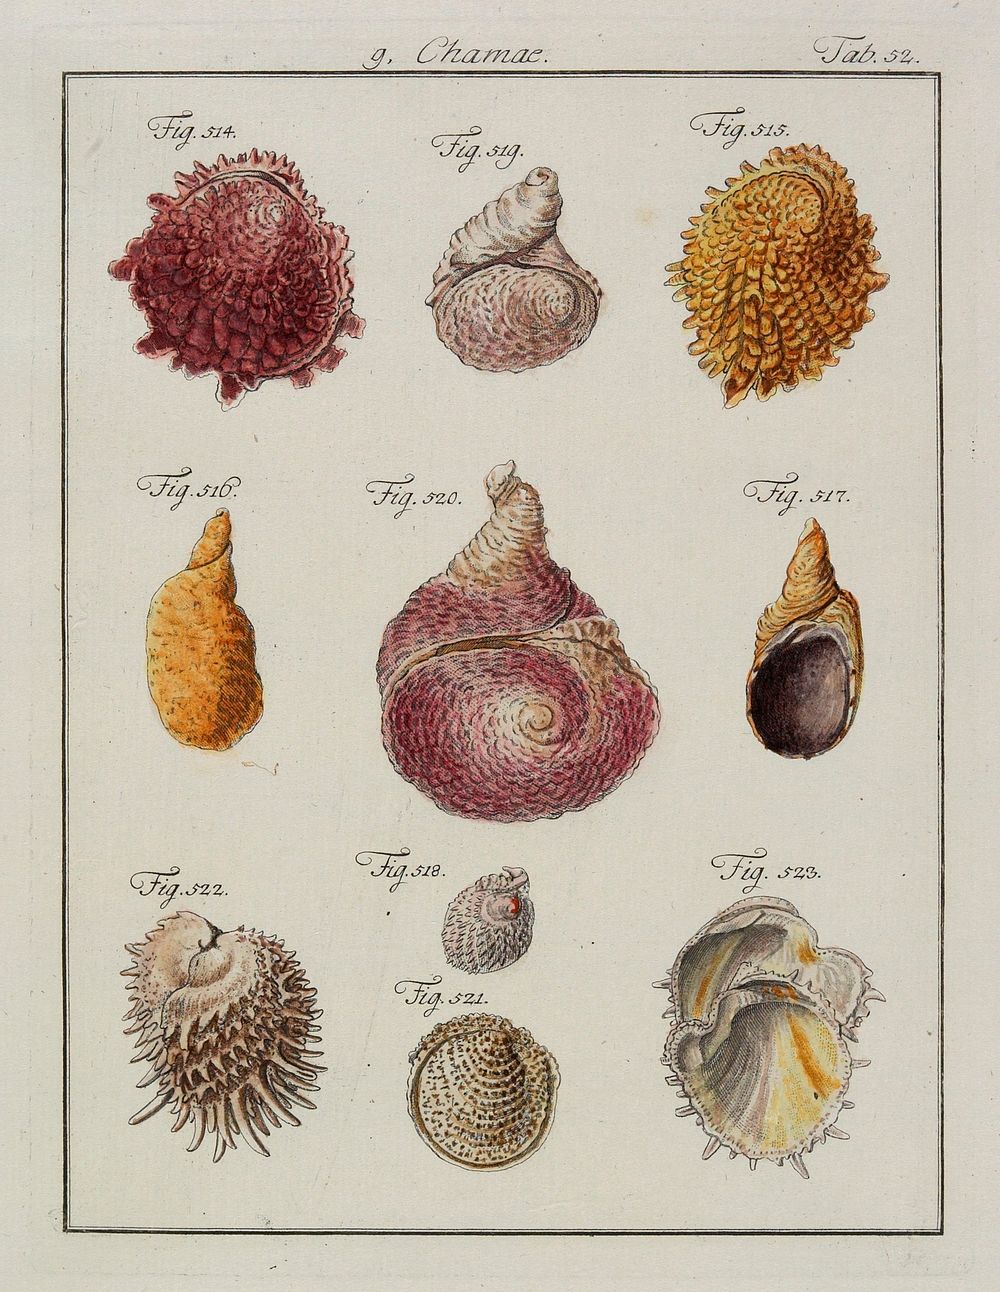 10 shells of varied shapes and colors, numbered "Fig. 514" through "Fig. 523". Original from the Minneapolis Institute of…